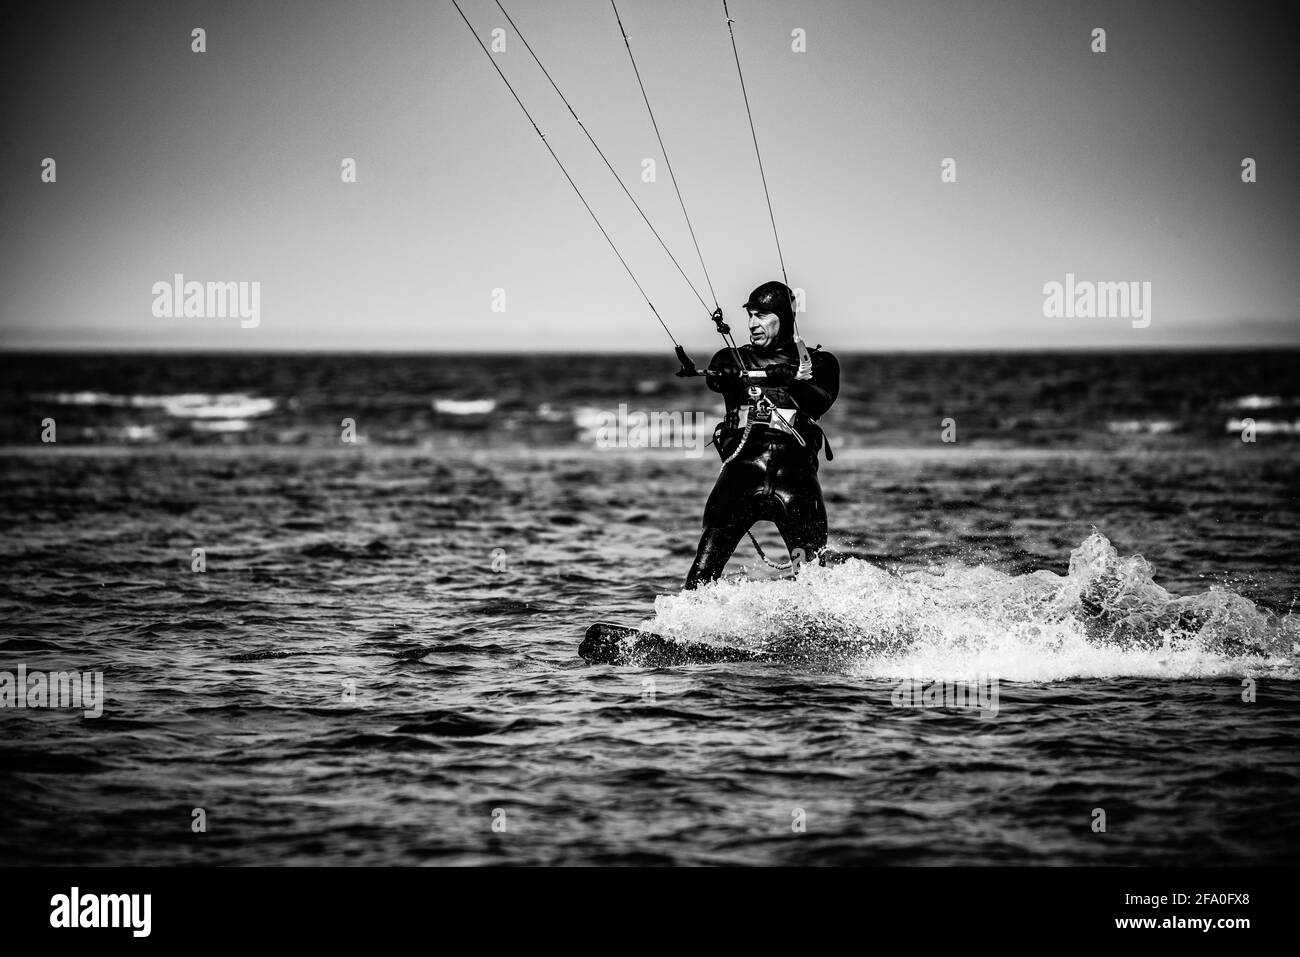 professional kiter makes the difficult trick on a beautiful background of spray and beautiful mountains of Mauritius Stock Photo